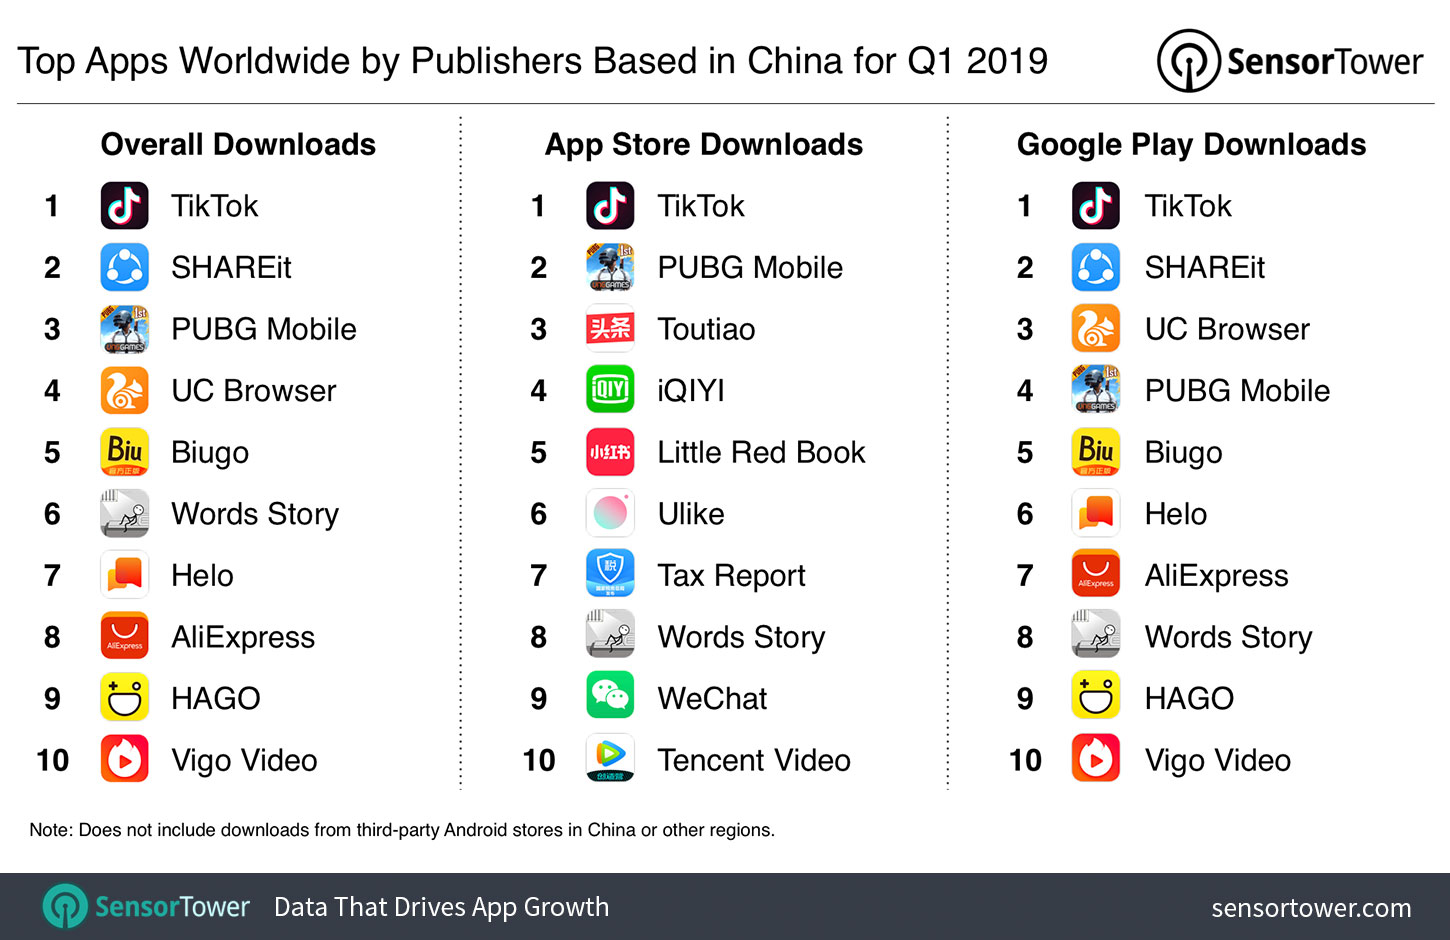 Top Apps Worldwide by Publishers based in China for Q1 2019